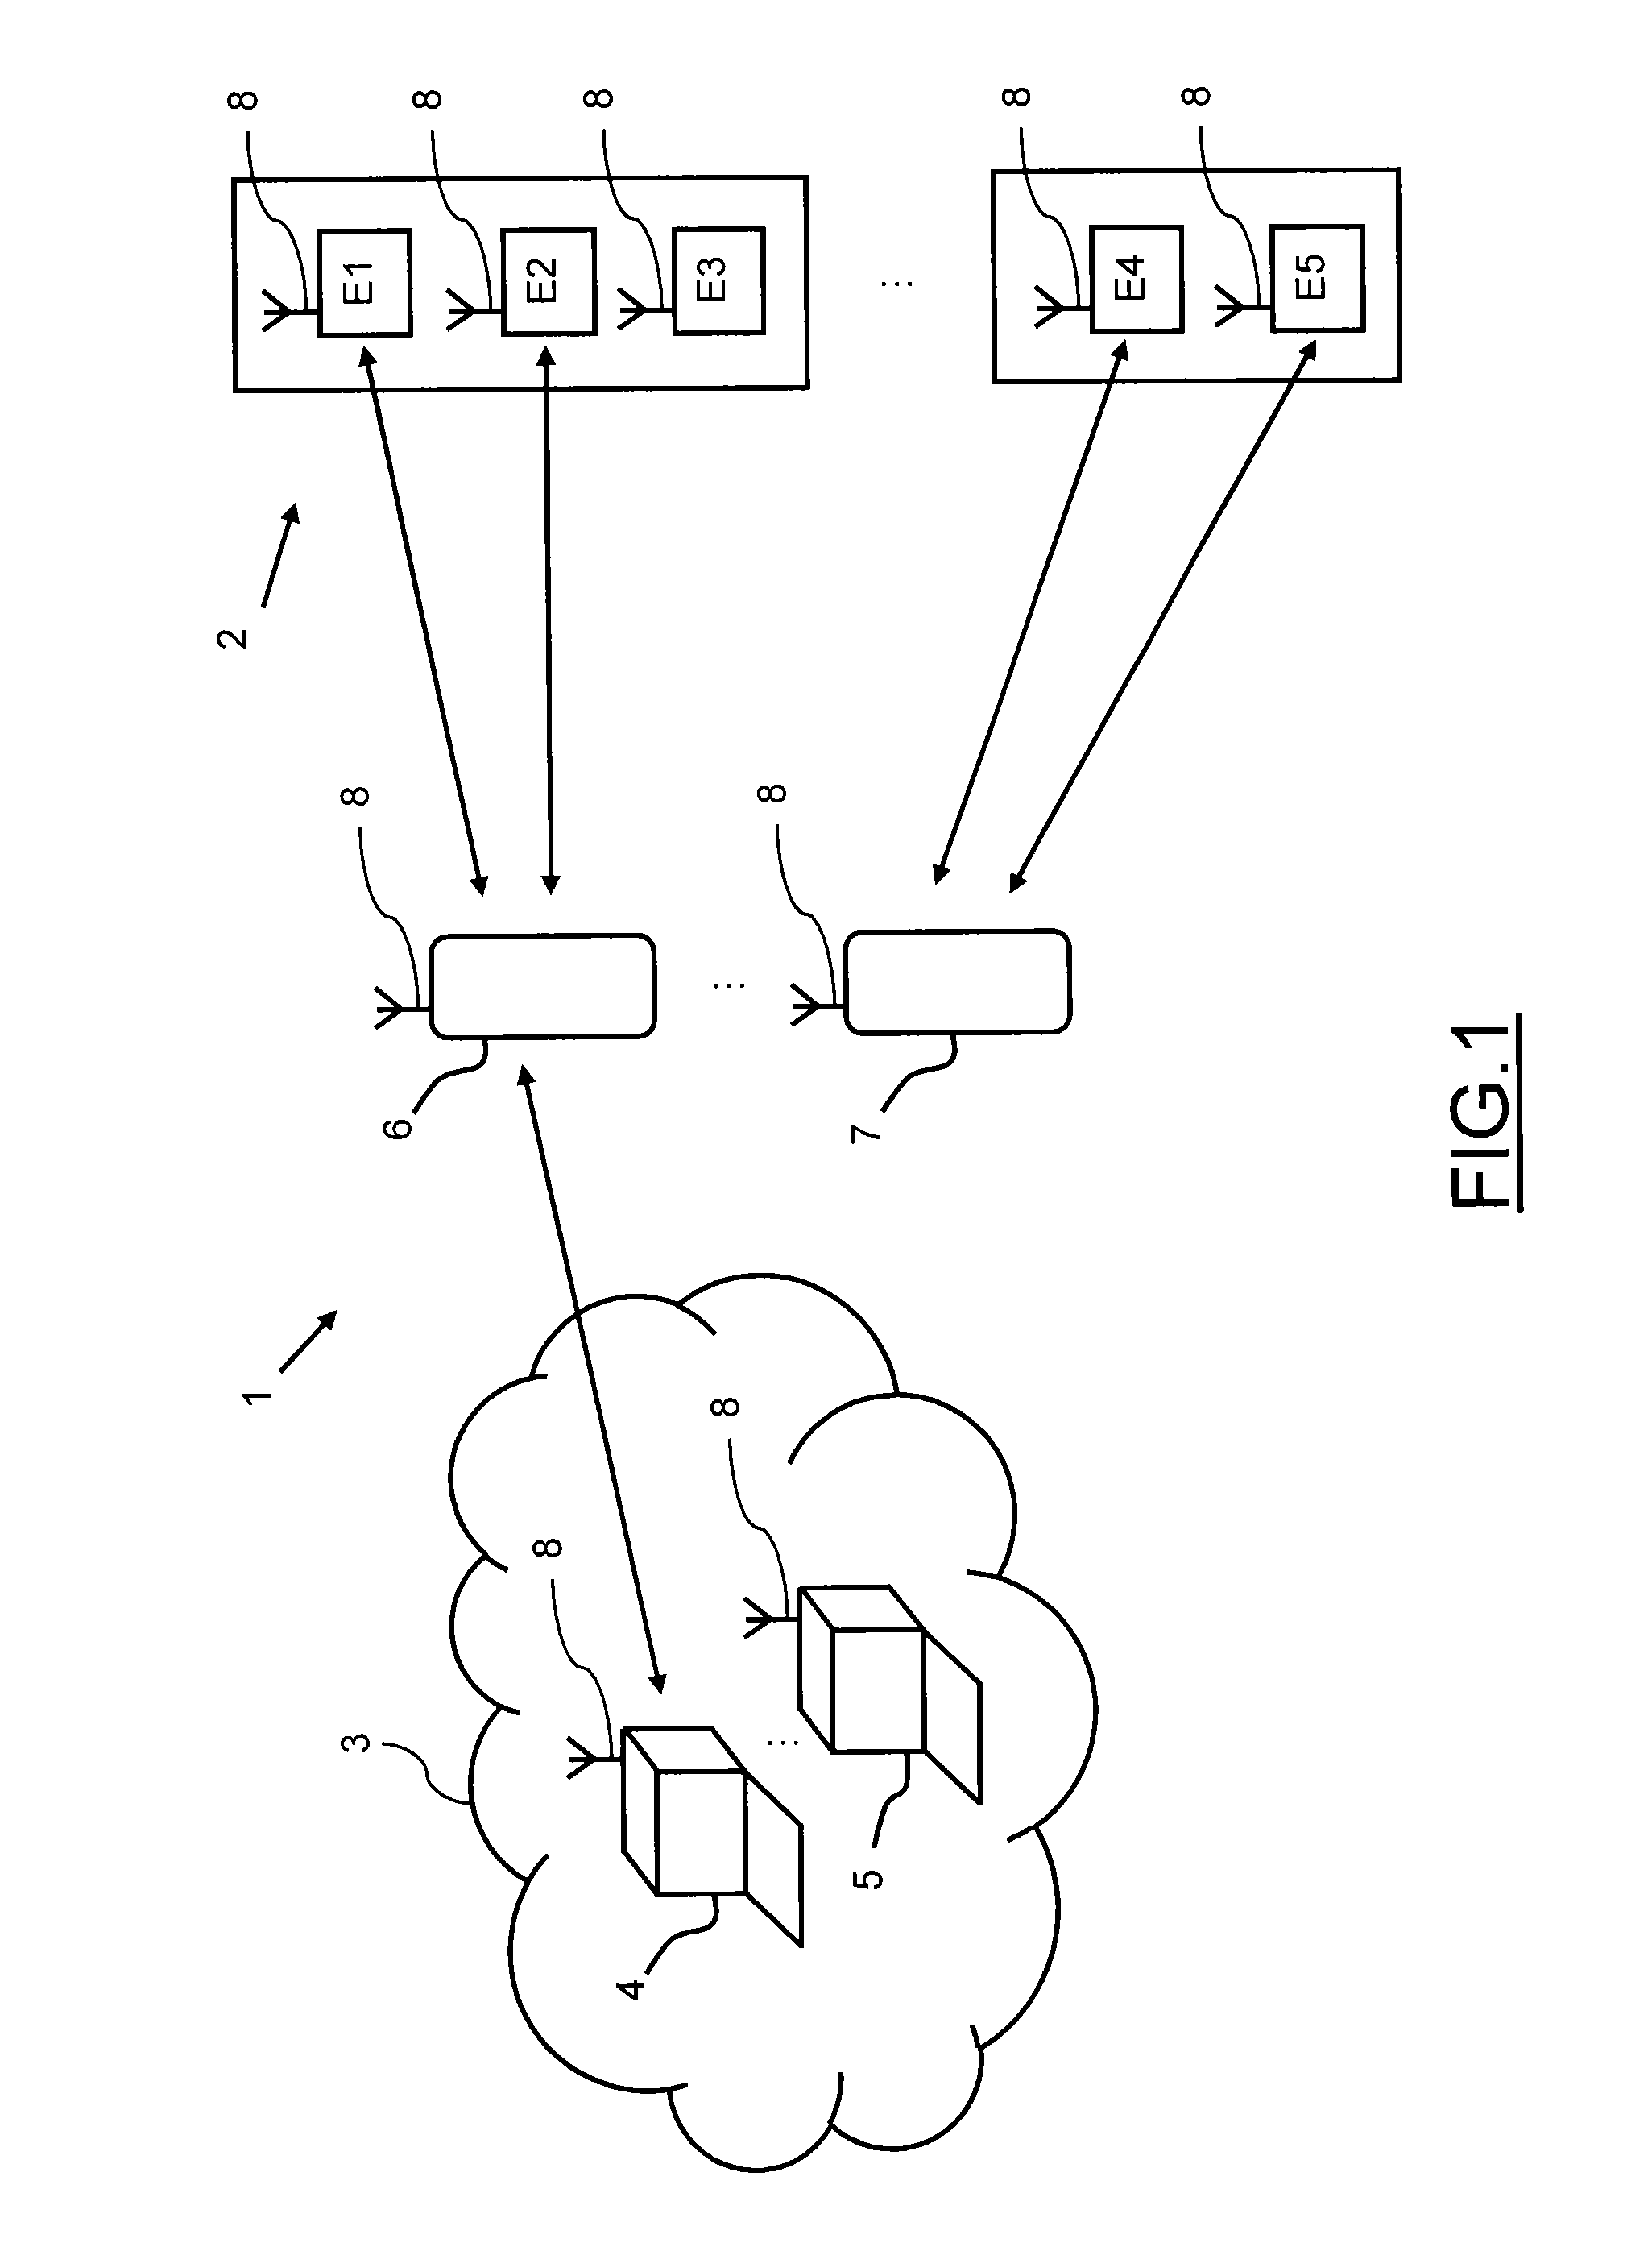 Method and system for transmitting messages using a mobile communication device